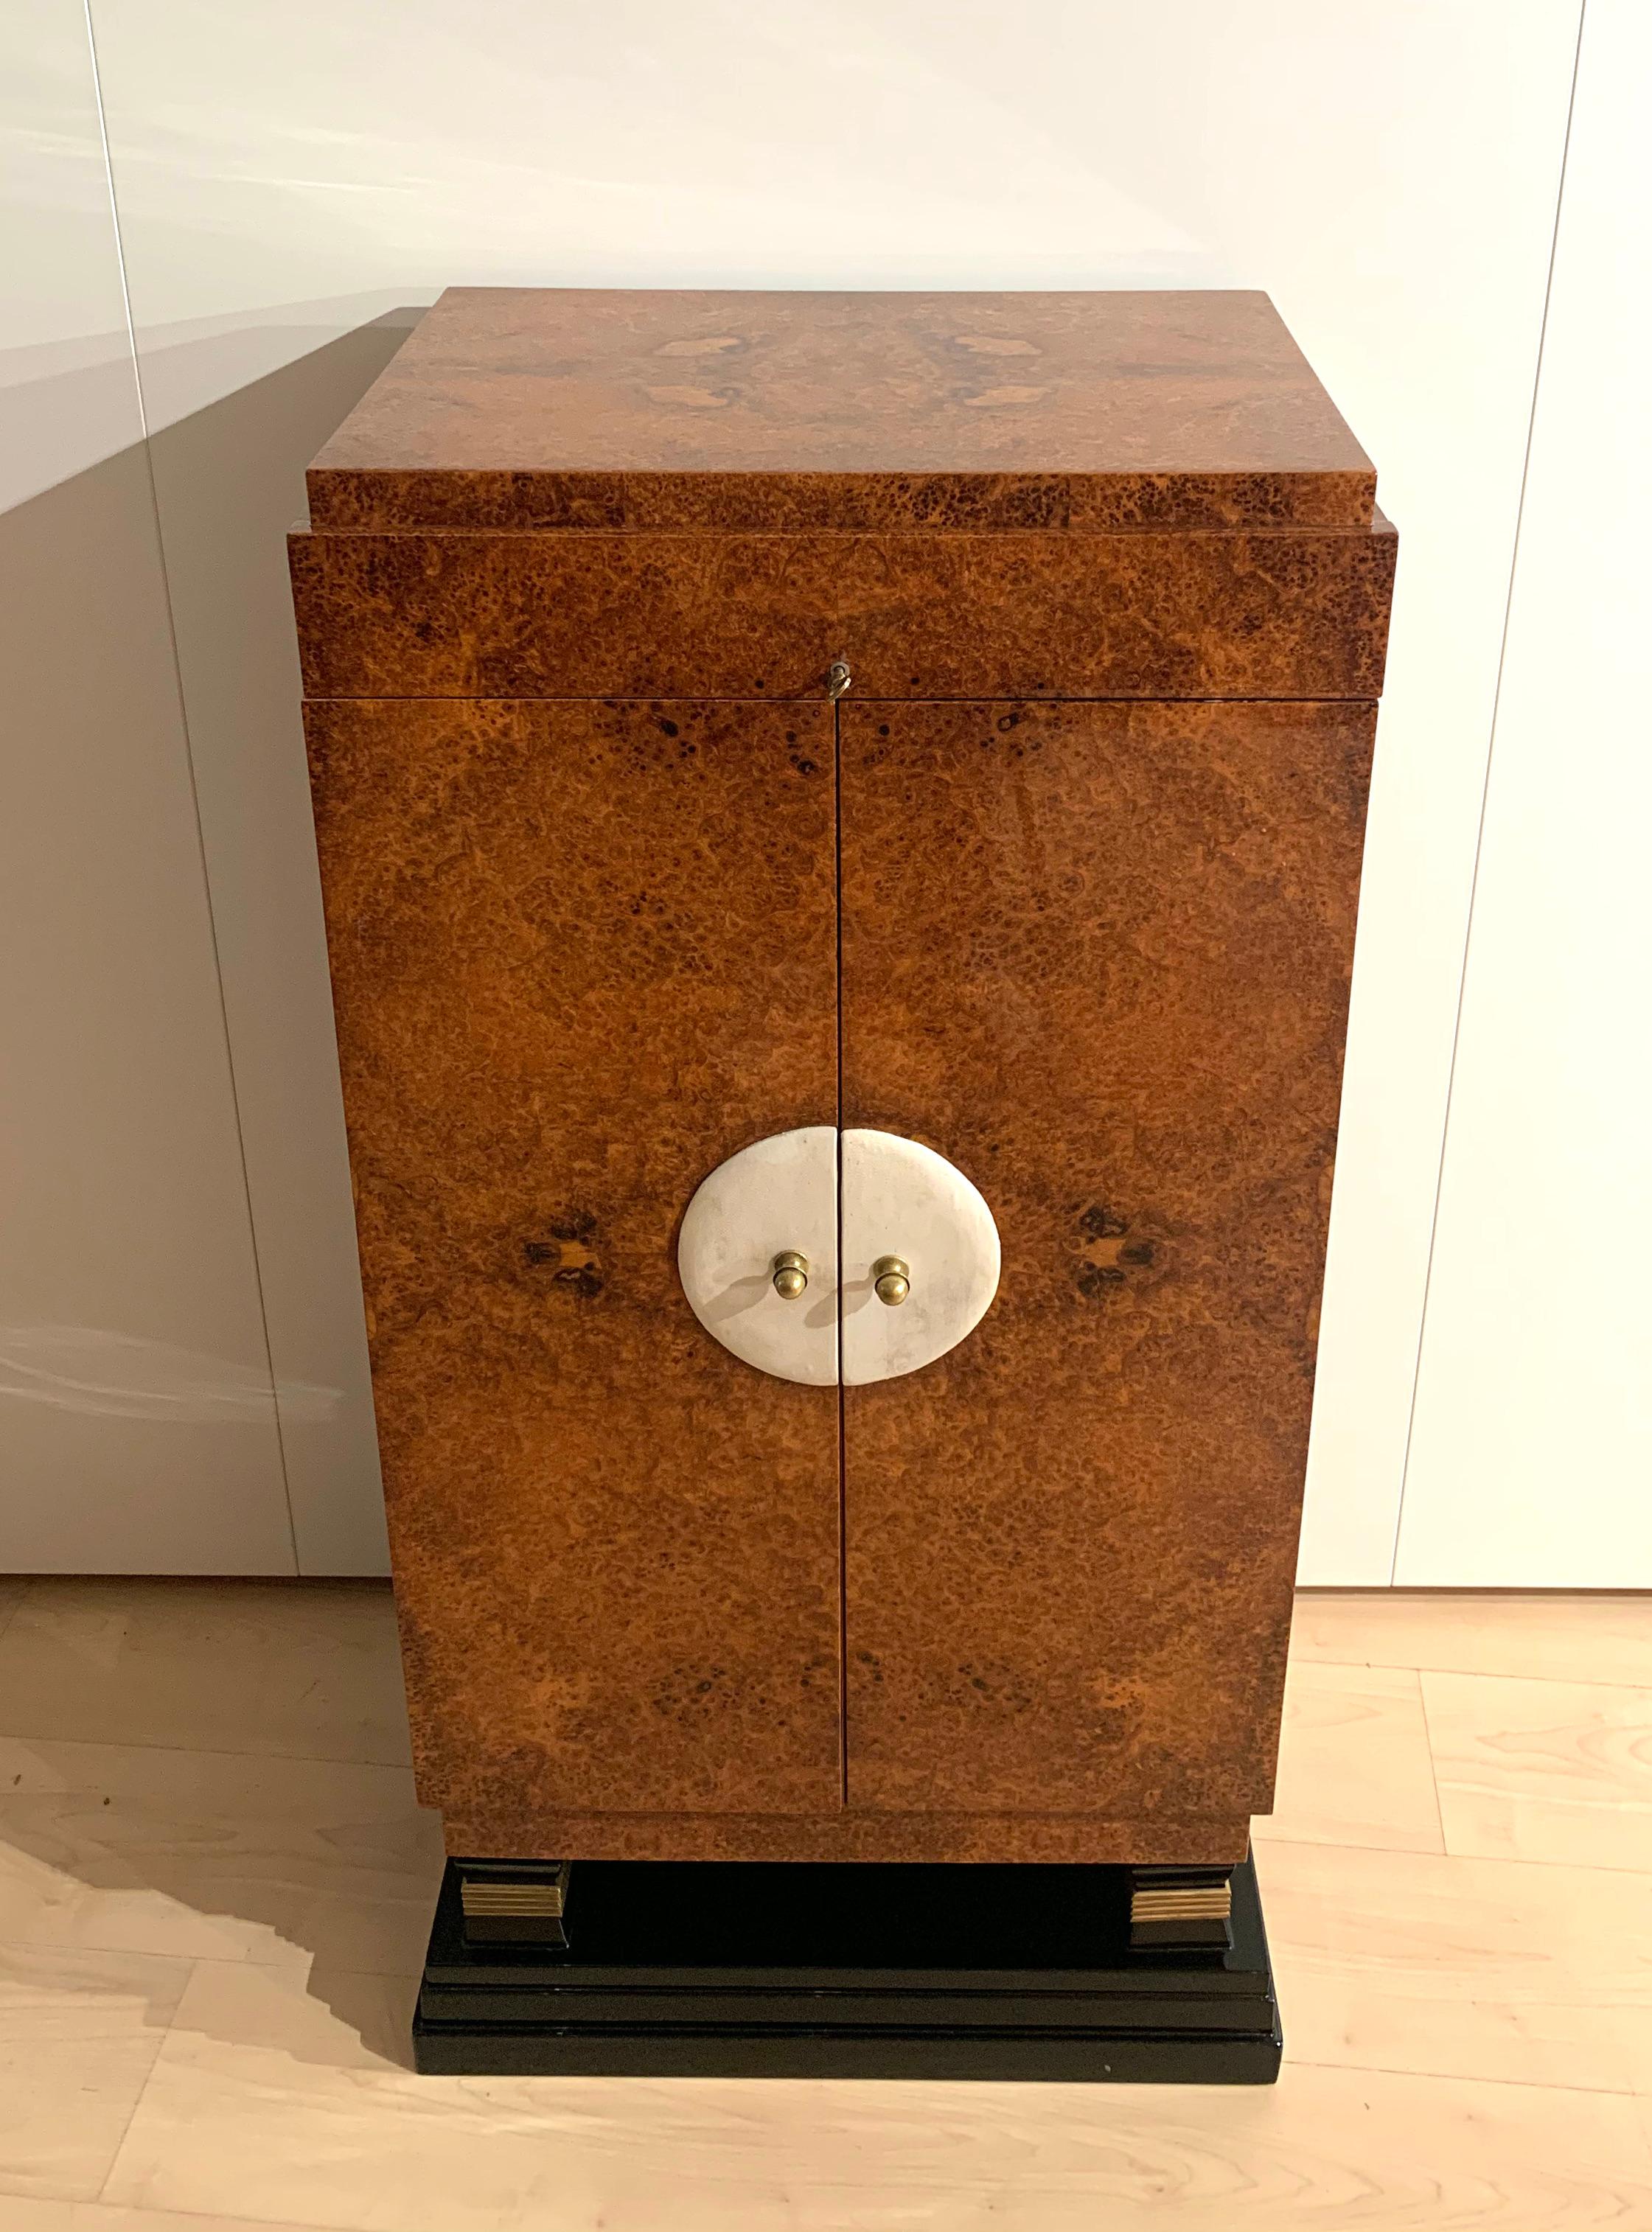 Beautiful, rare, small Art Deco Cabinet / Wardrobe, Amboyna Roos Veneer, leather and brass from France circa 1930

Lovely yellow-brown Amboyna Roots Veneer (loupe d'amboine), high-gloss clear lacquer finish. Original brass handles on white leather